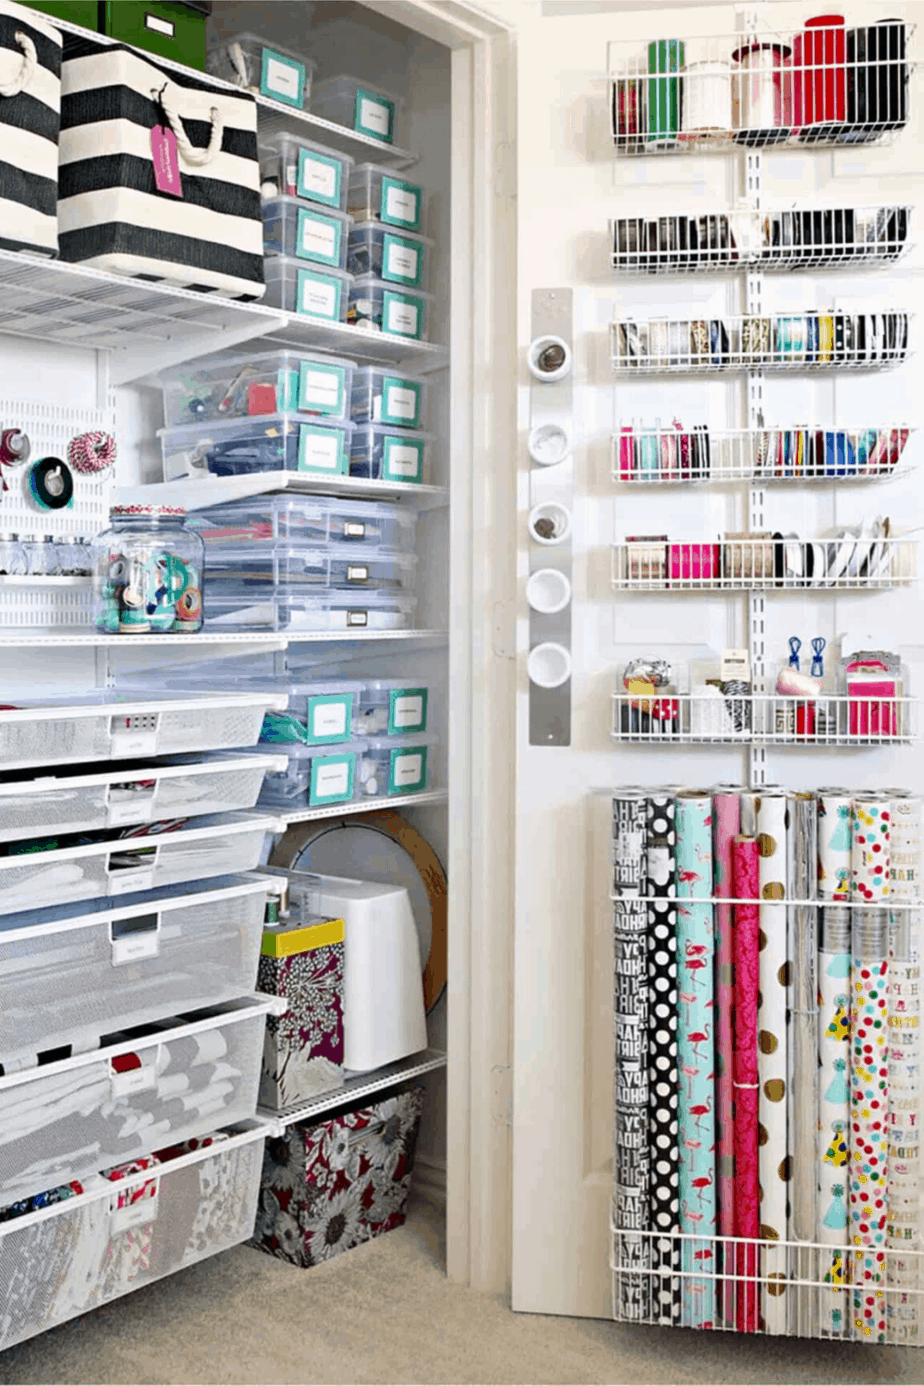 Helpful Organizing and Storage Tips for Craft Supplies - Too Much Love